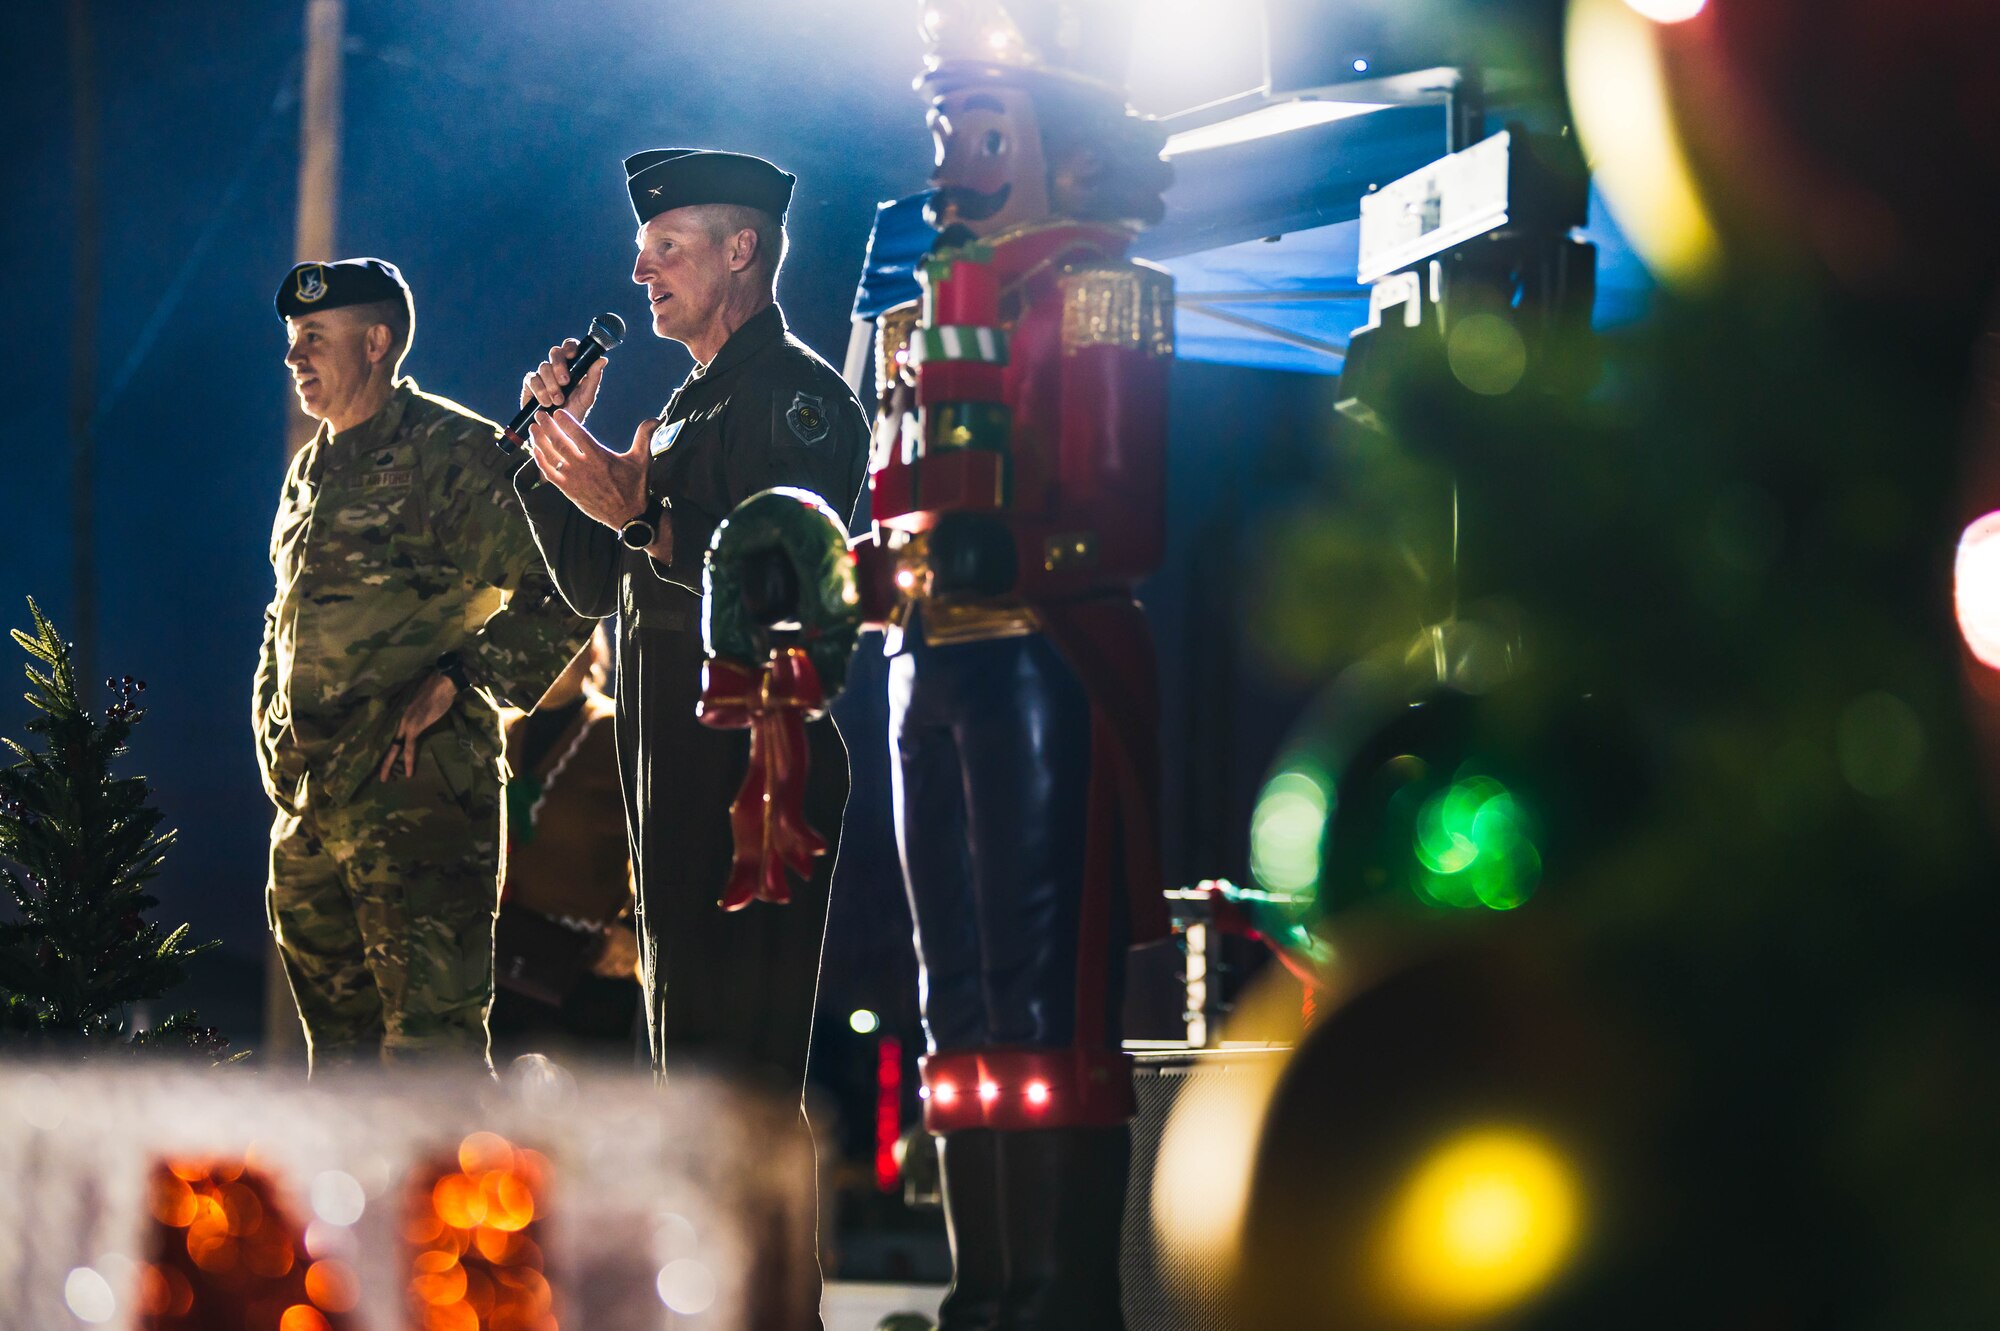 U.S. Air Force Brig. Gen. Jason Rueschhoff (right), 56th Fighter Wing commander, and Chief Master Sgt. Jason Shaffer (left), 56th Fighter Wing command chief, address Luke Air Force Base personnel and their families during a Holiday Magic event.